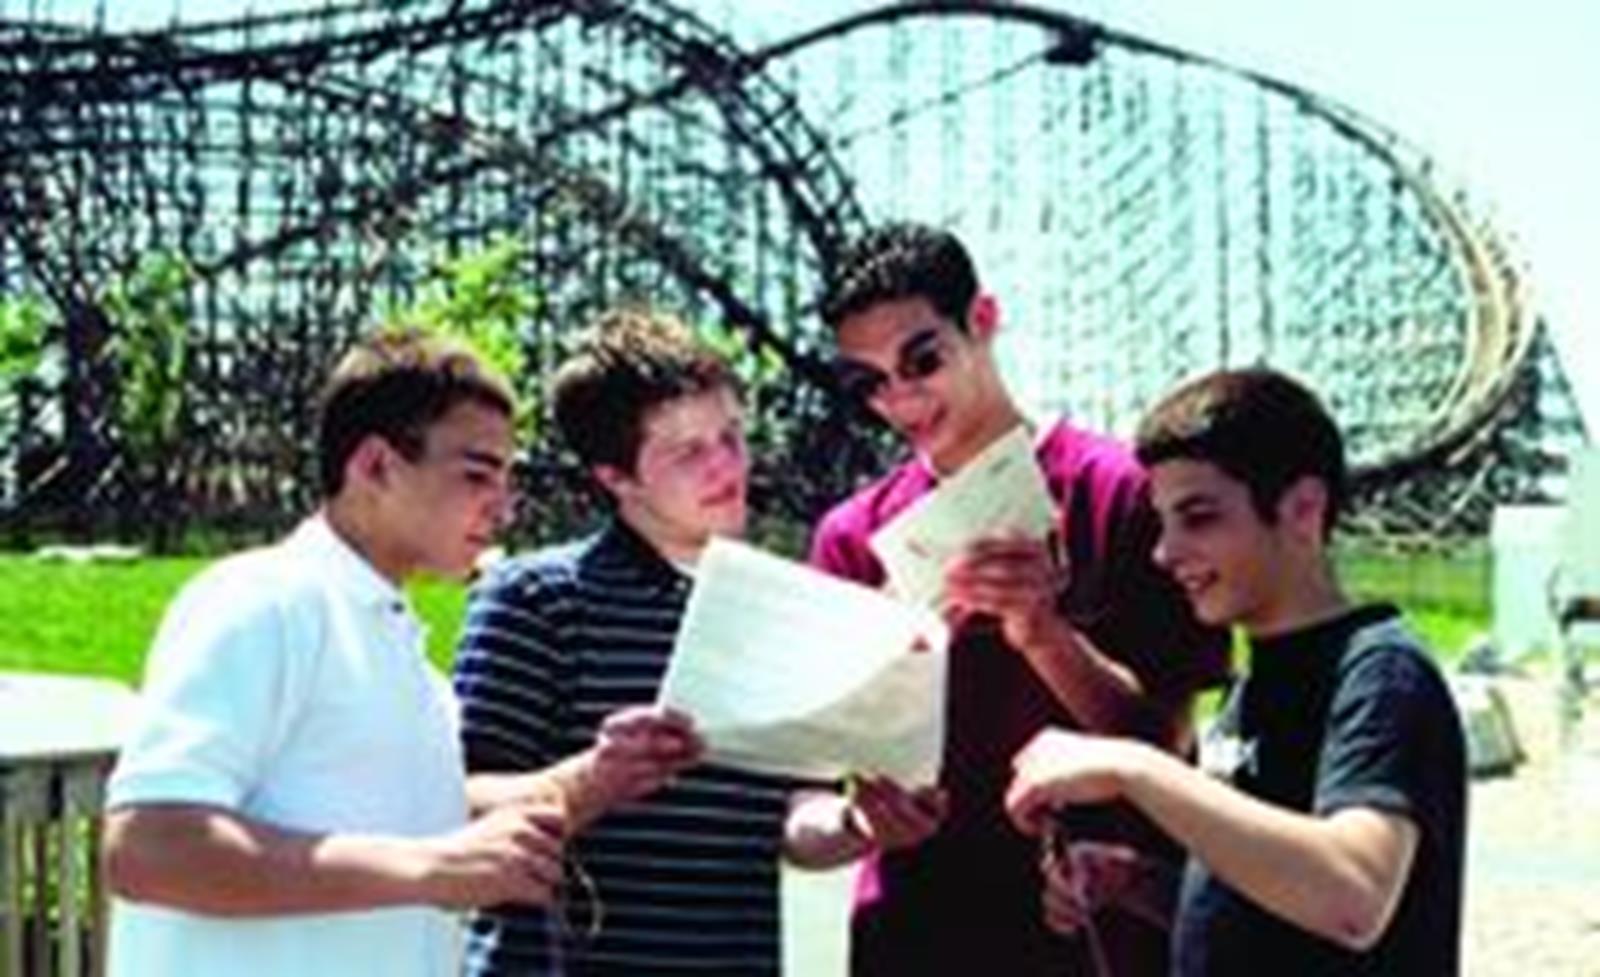 10 Top Theme Parks for Student Groups to Discover